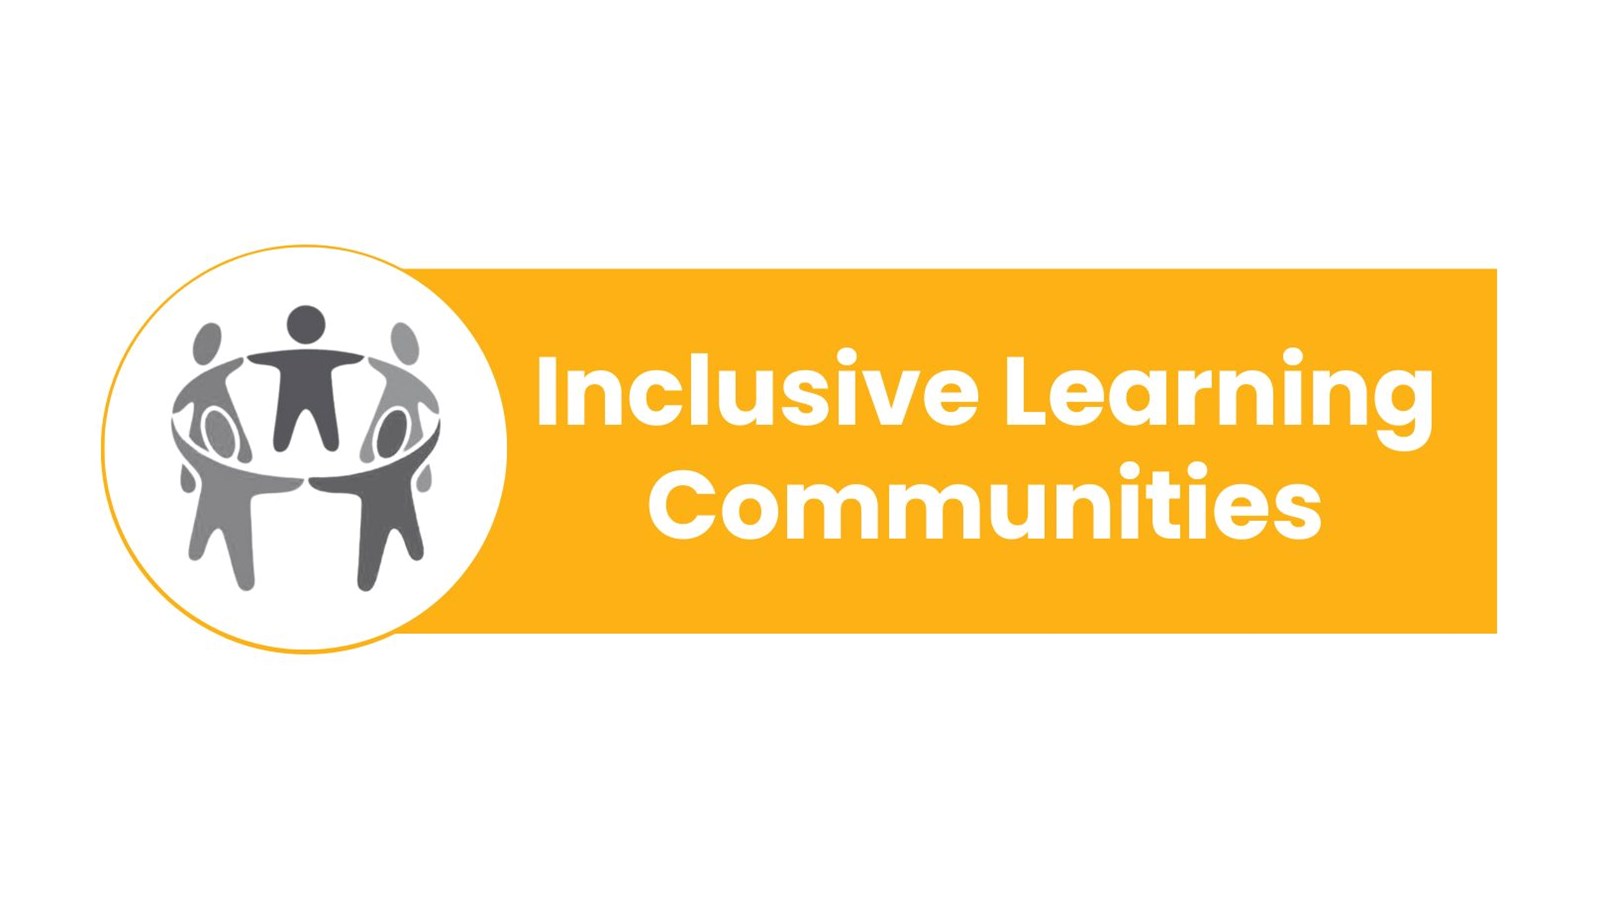 Inclusive Learning Communities